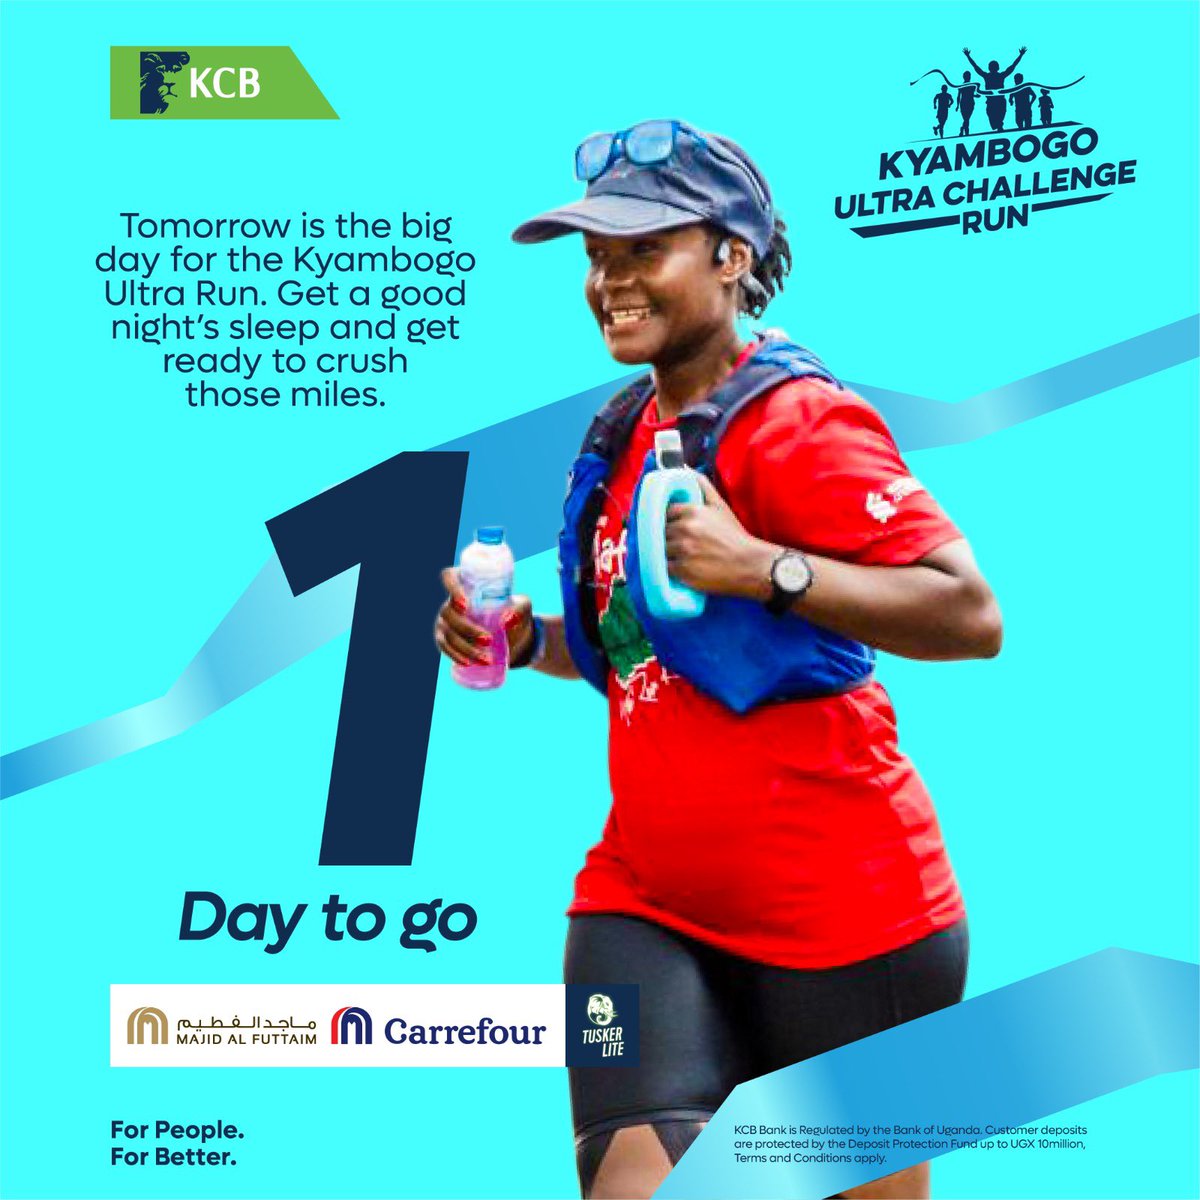 The Kyambogo Ultra Run is here 🥳

The count down is over, we are excited to see you at the start line tomorrow 6:00AM 50KM & 6:30AM 25KM 😎

#KyambogoUltraChallengeRun #ForPeopleForBetter